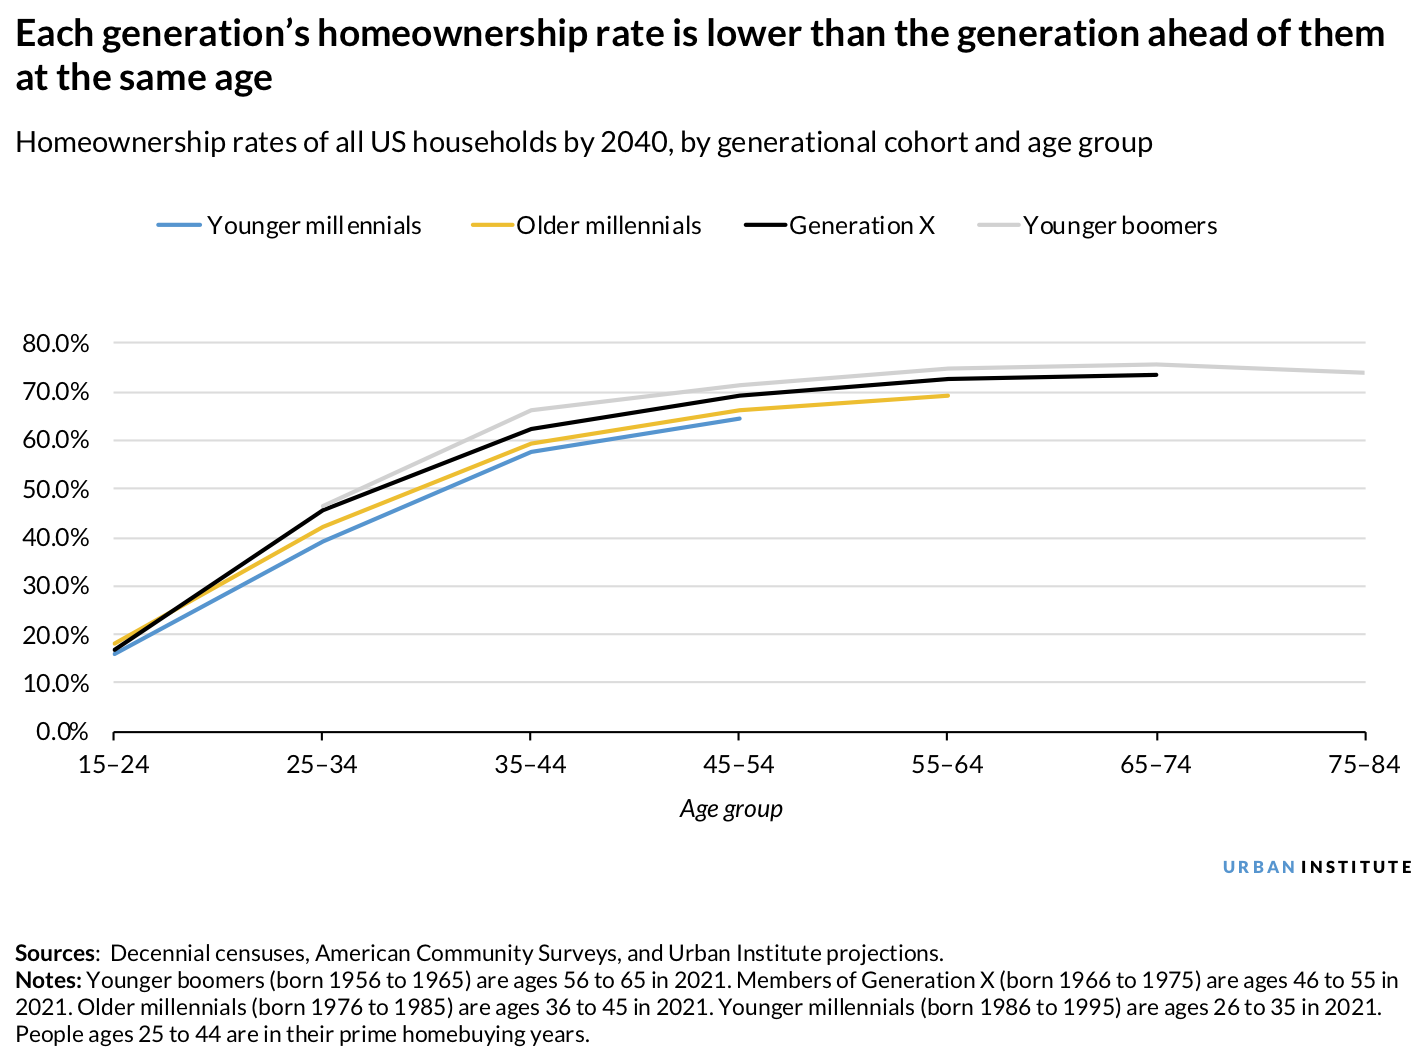 Homeownership rates by 2040, by age and generational cohort